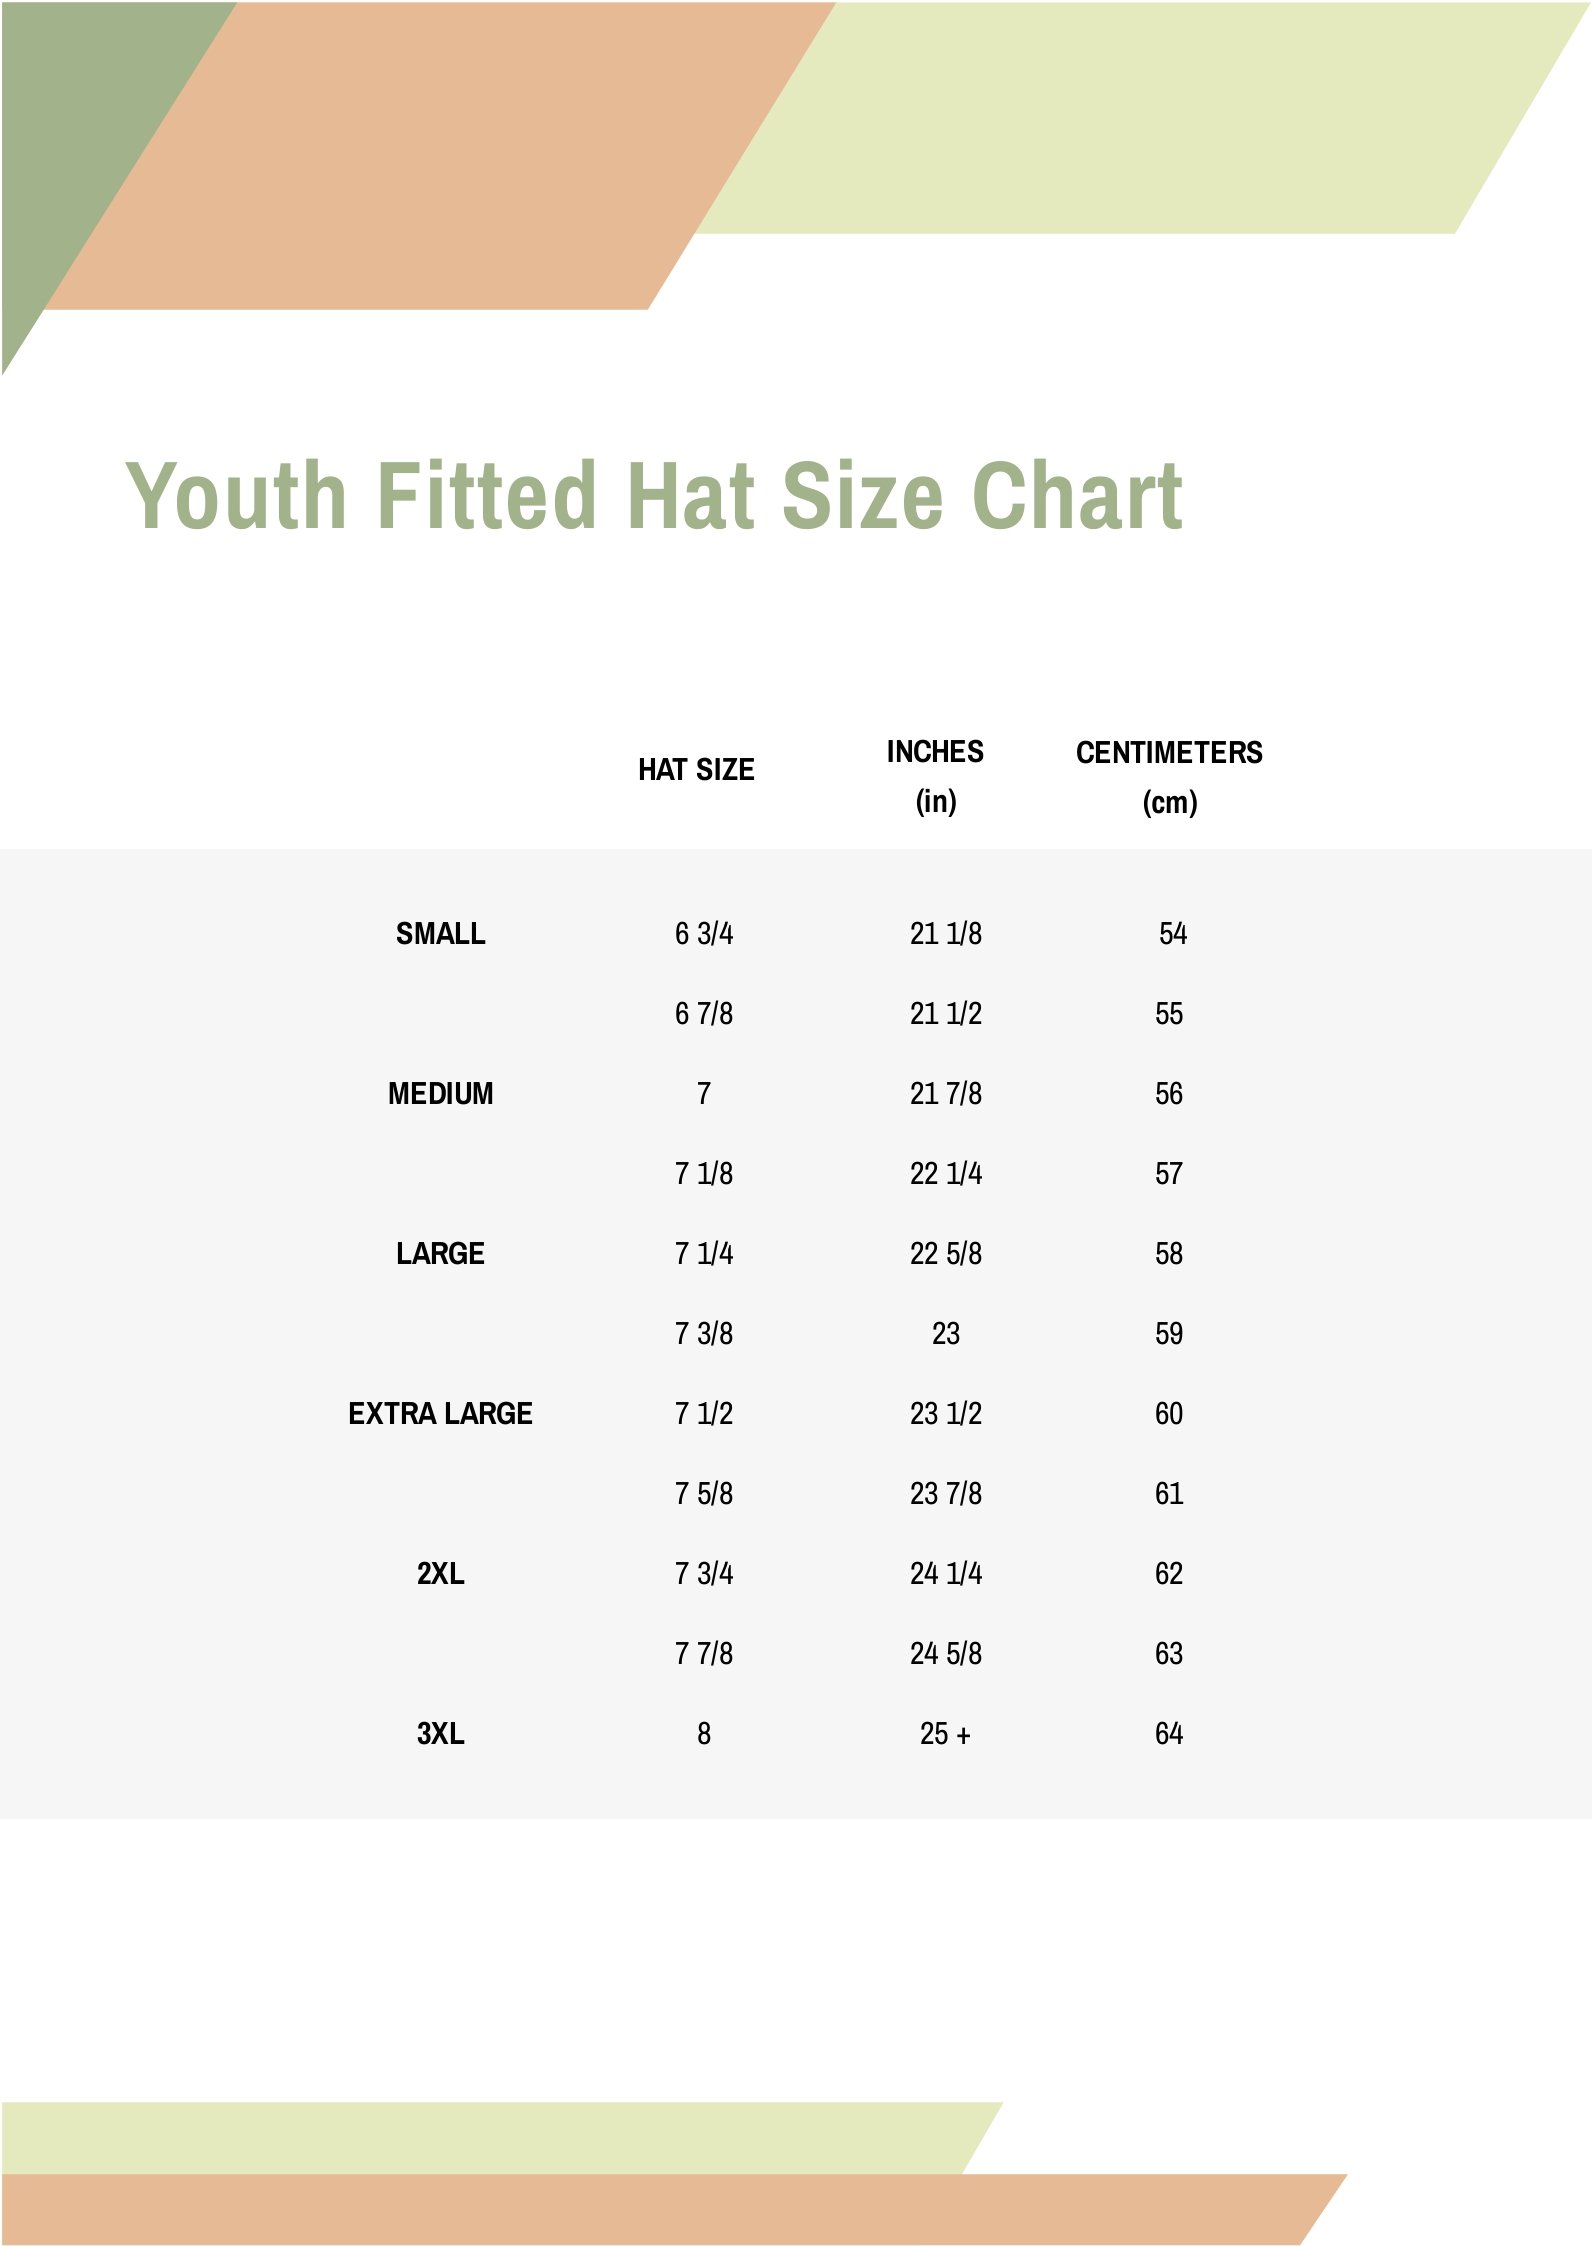 Free Youth Fitted Hat Size Chart - Download in PDF